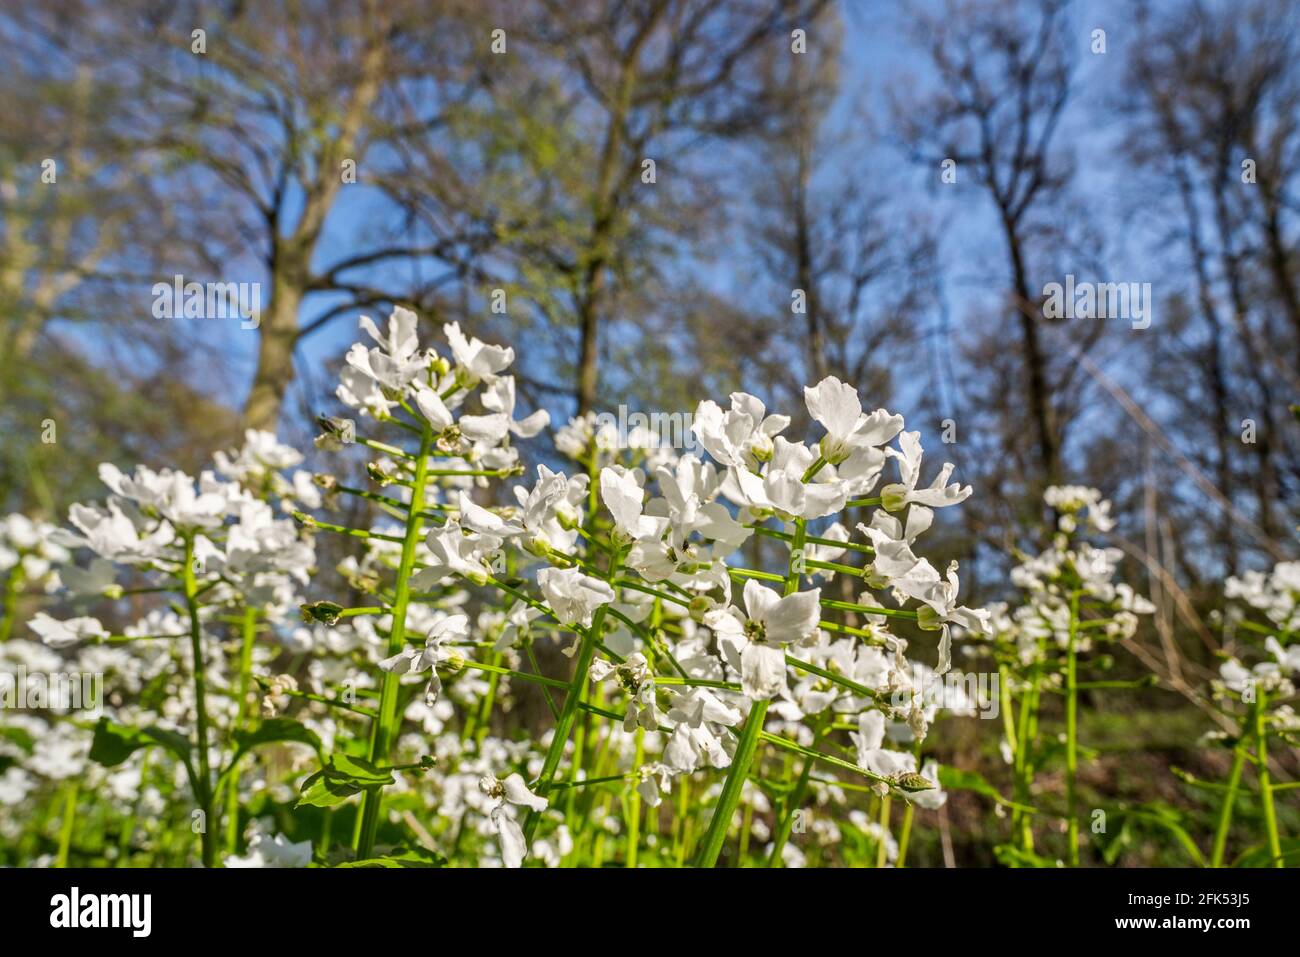 Cuckoo flower / lady's smock / mayflower (Cardamine pratensis) with rare white petals flowering in spring Stock Photo